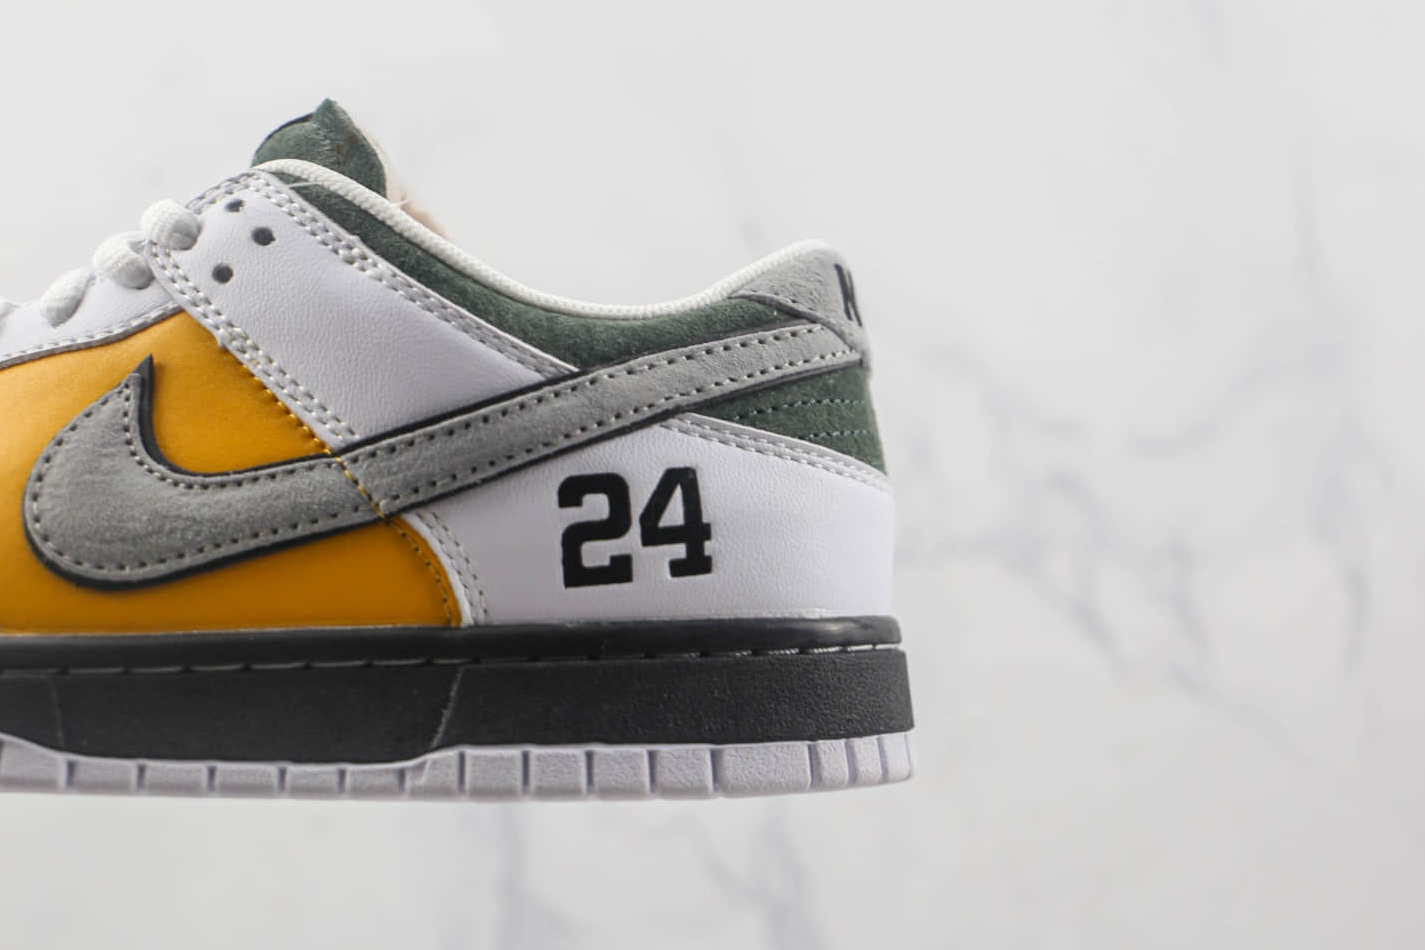 Nike SB Dunk Low Kobe White Yellow Green Black LF2428-001 - Stylish and Vibrant Sneaker for Sports and Streetwear | Fast Shipping Available